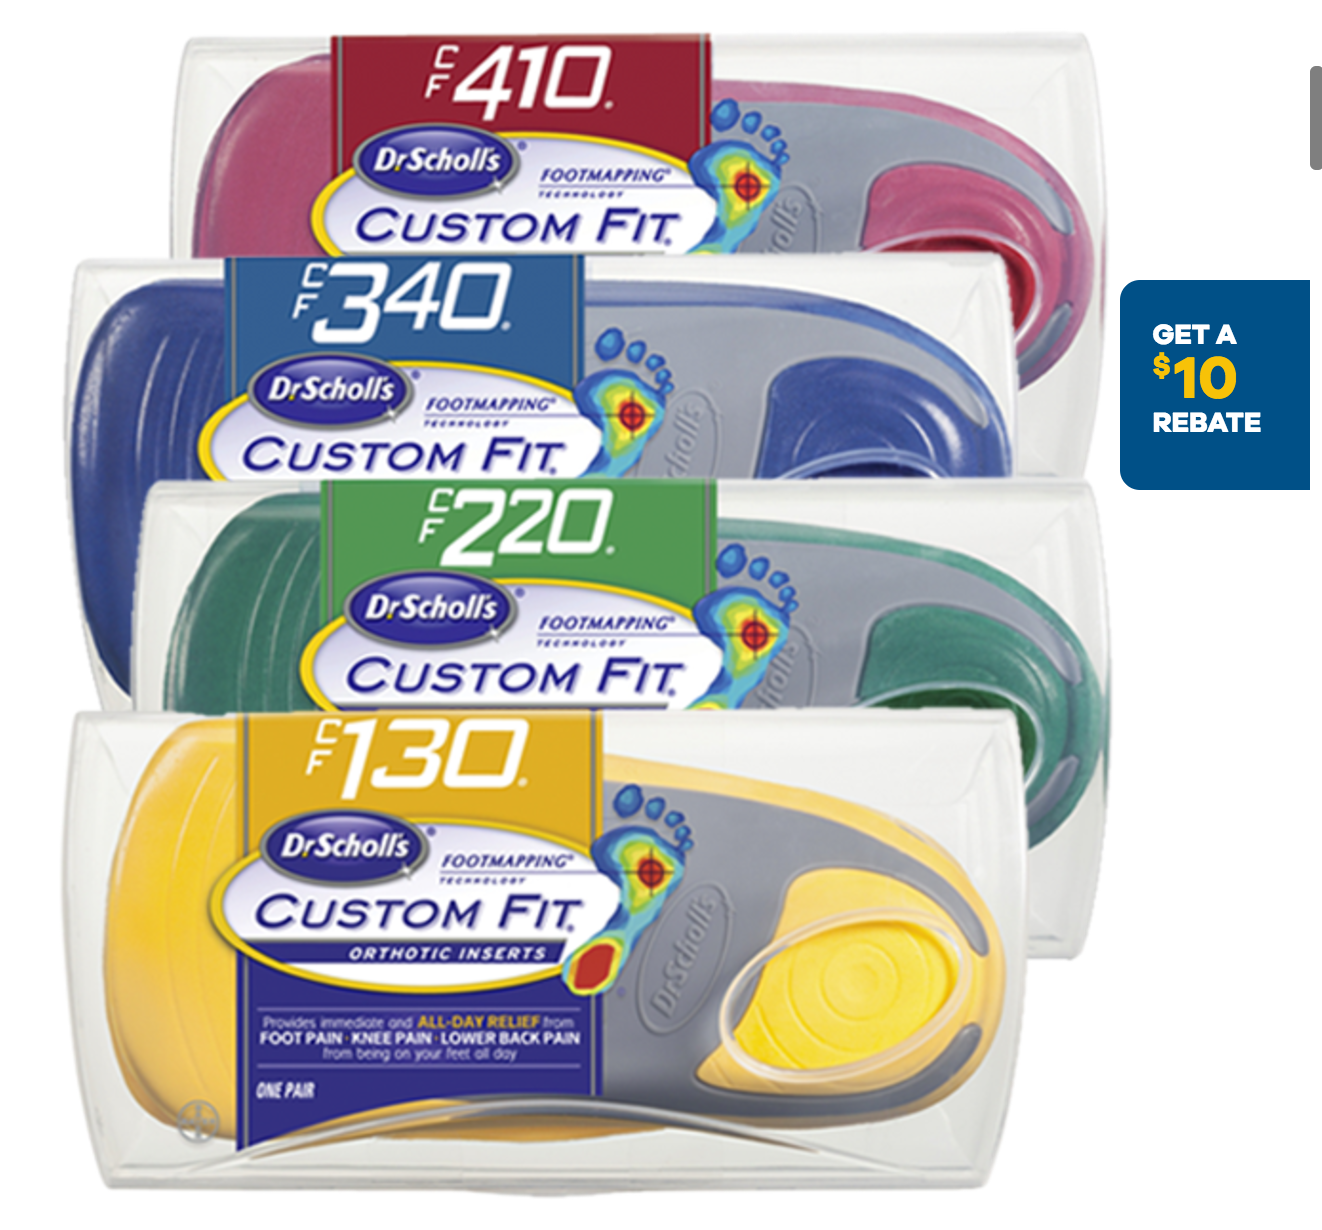 Get Dr Scholls Custom Fit Foot Inserts For Only 29 96 Reg 49 96 At 